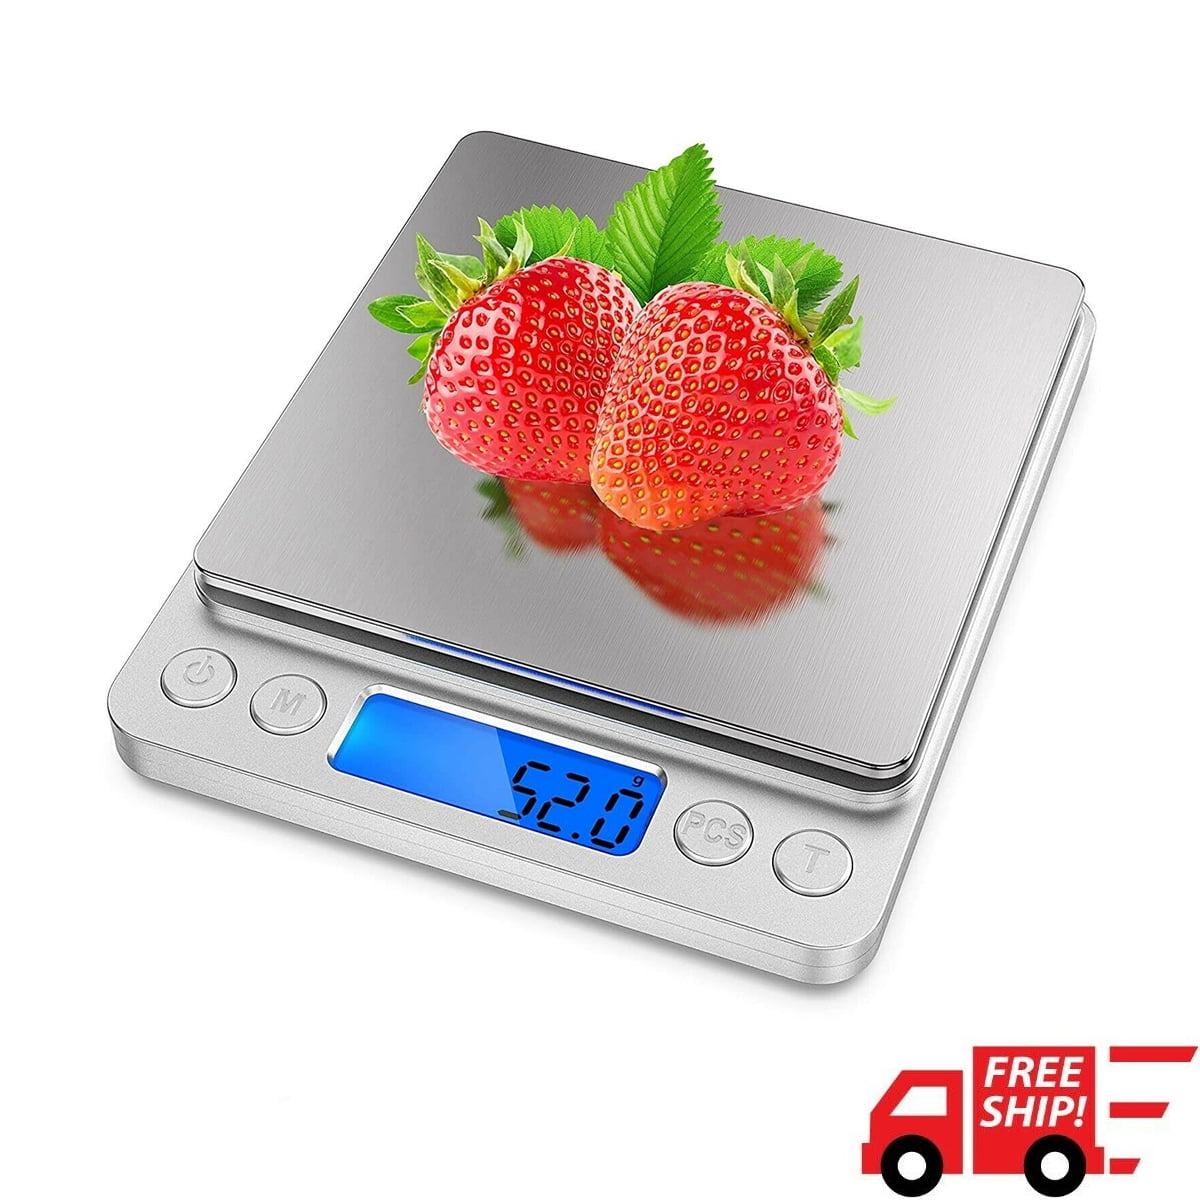 Etekcity Kitchen Scale, Digital food scale in Grams and Ounces for Weight  Loss, Baking, Cooking, Keto and Meal Prep, with platform of 8.5*7.3 inches,  Stainless Steel, 11 lb/5kg, Silver 